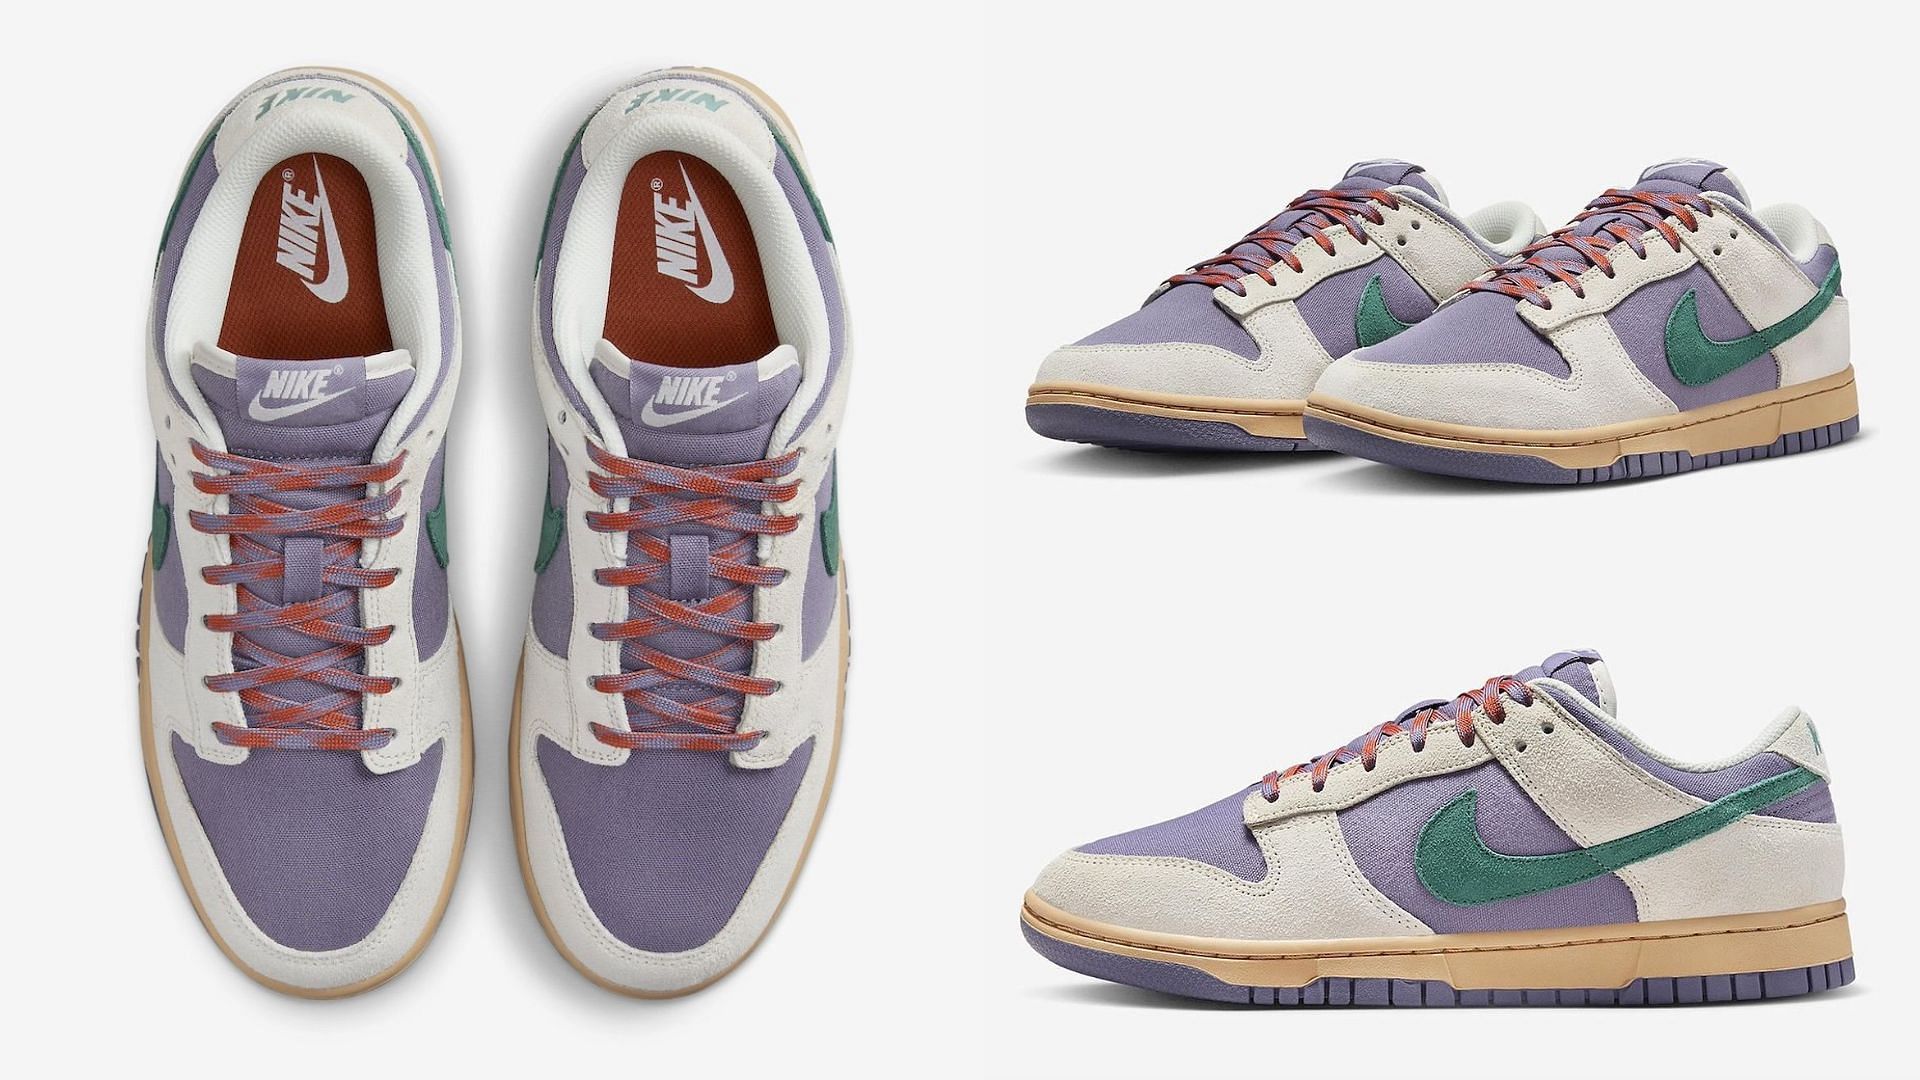 Closer look at the Nike Dunk Low Joker shoes (Image via YouTube/@inboxtogo)